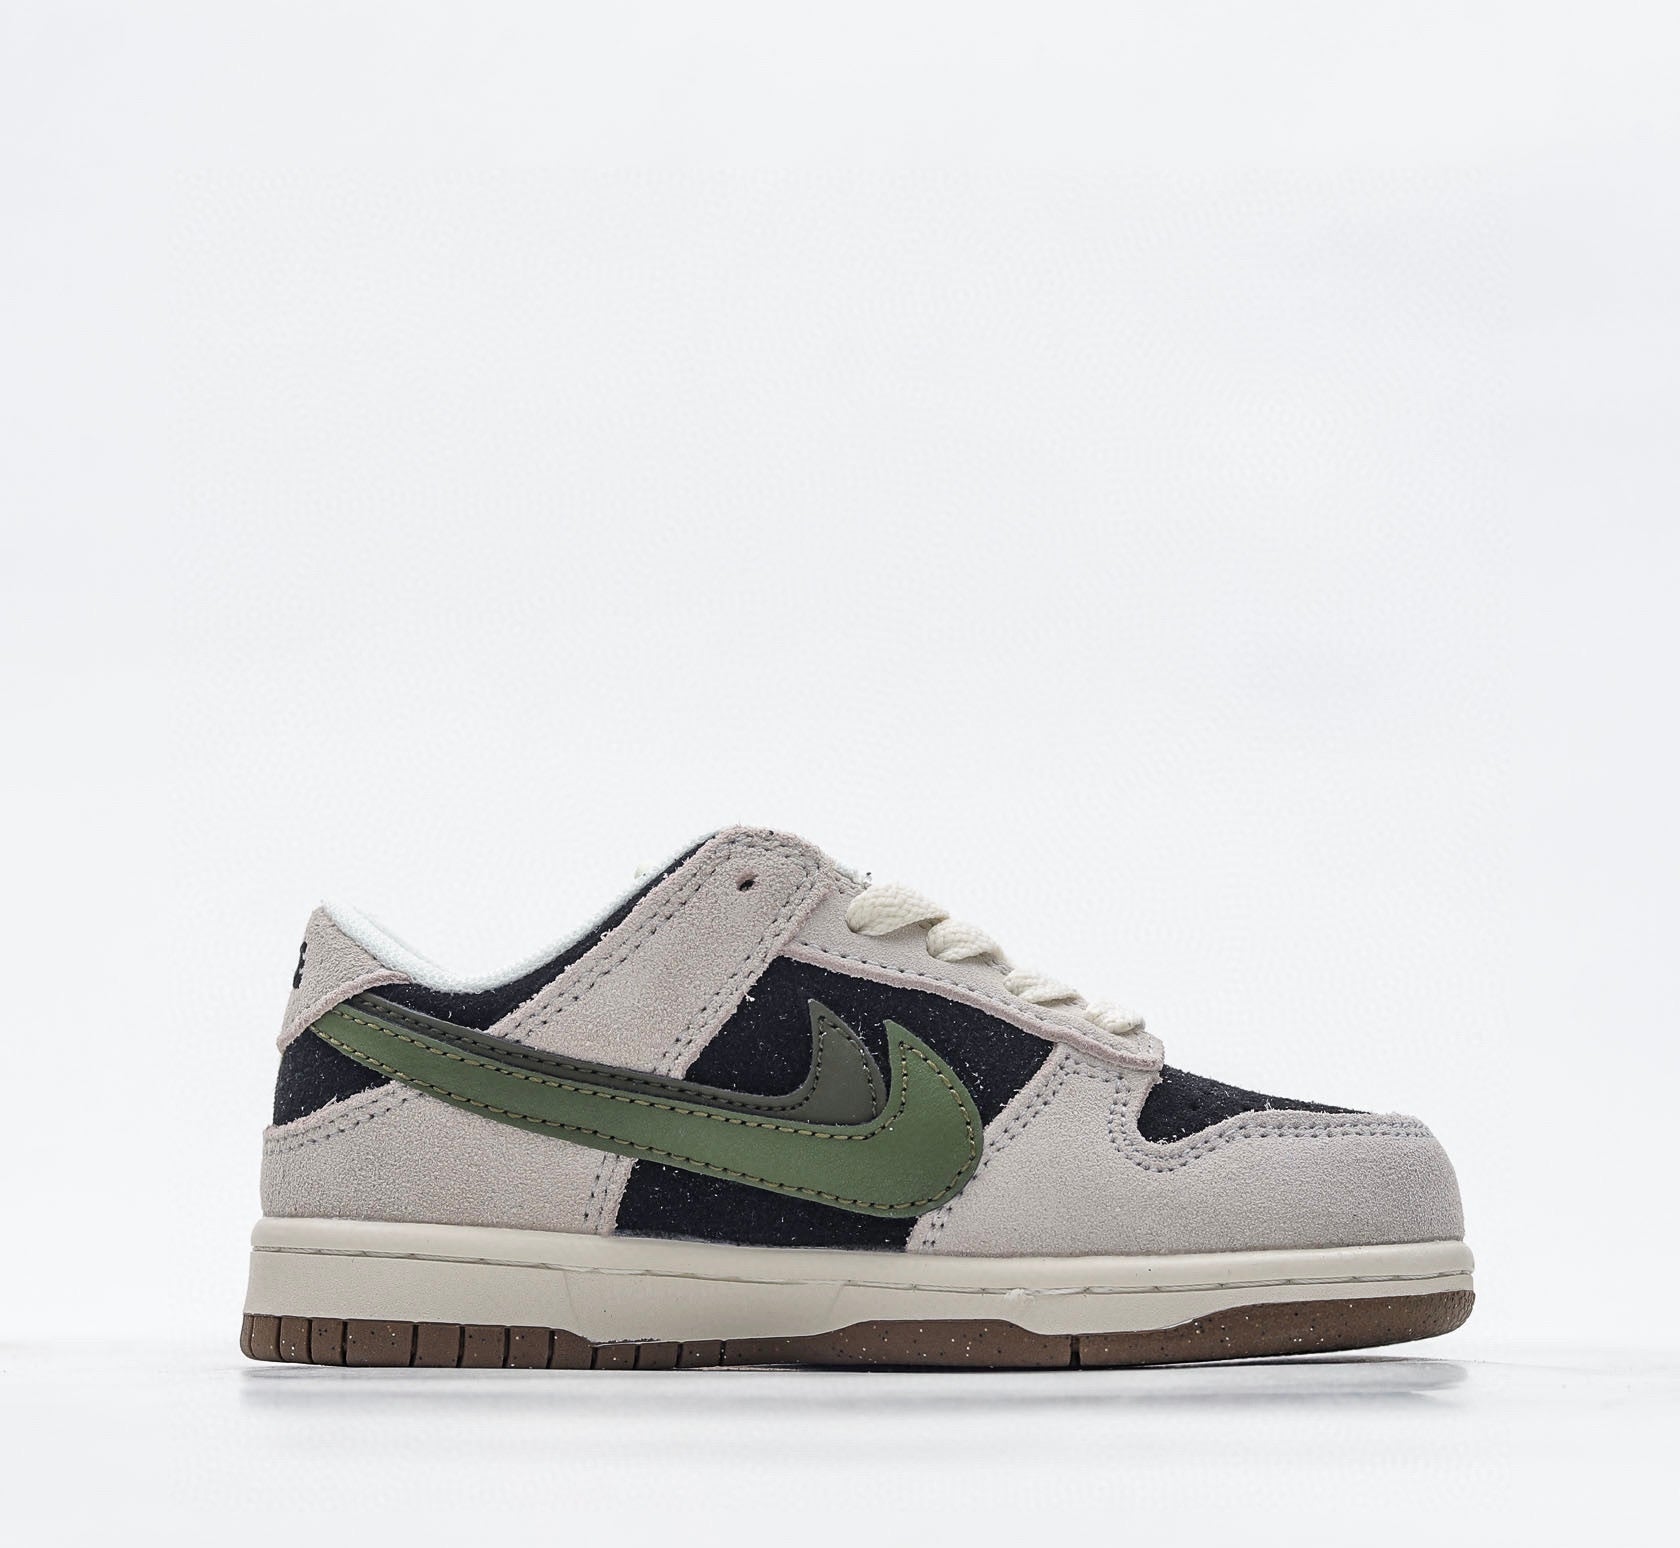 Nike SB grey and green shoes